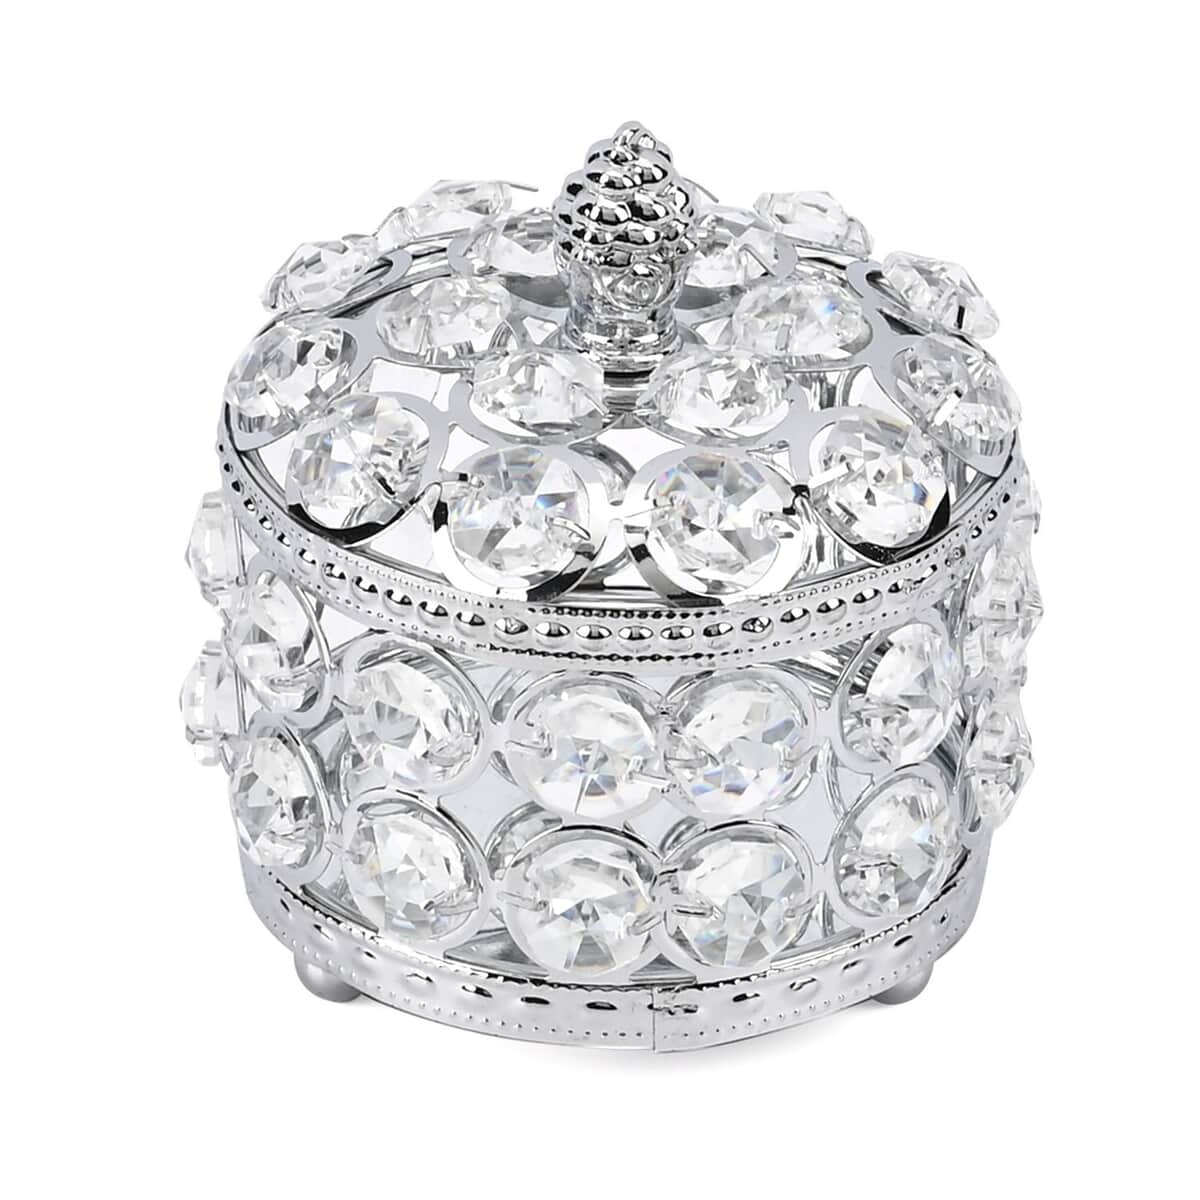 Silver Color Round Design Crystal Jewelry Box (3.9"x3.9"x3.5") image number 2